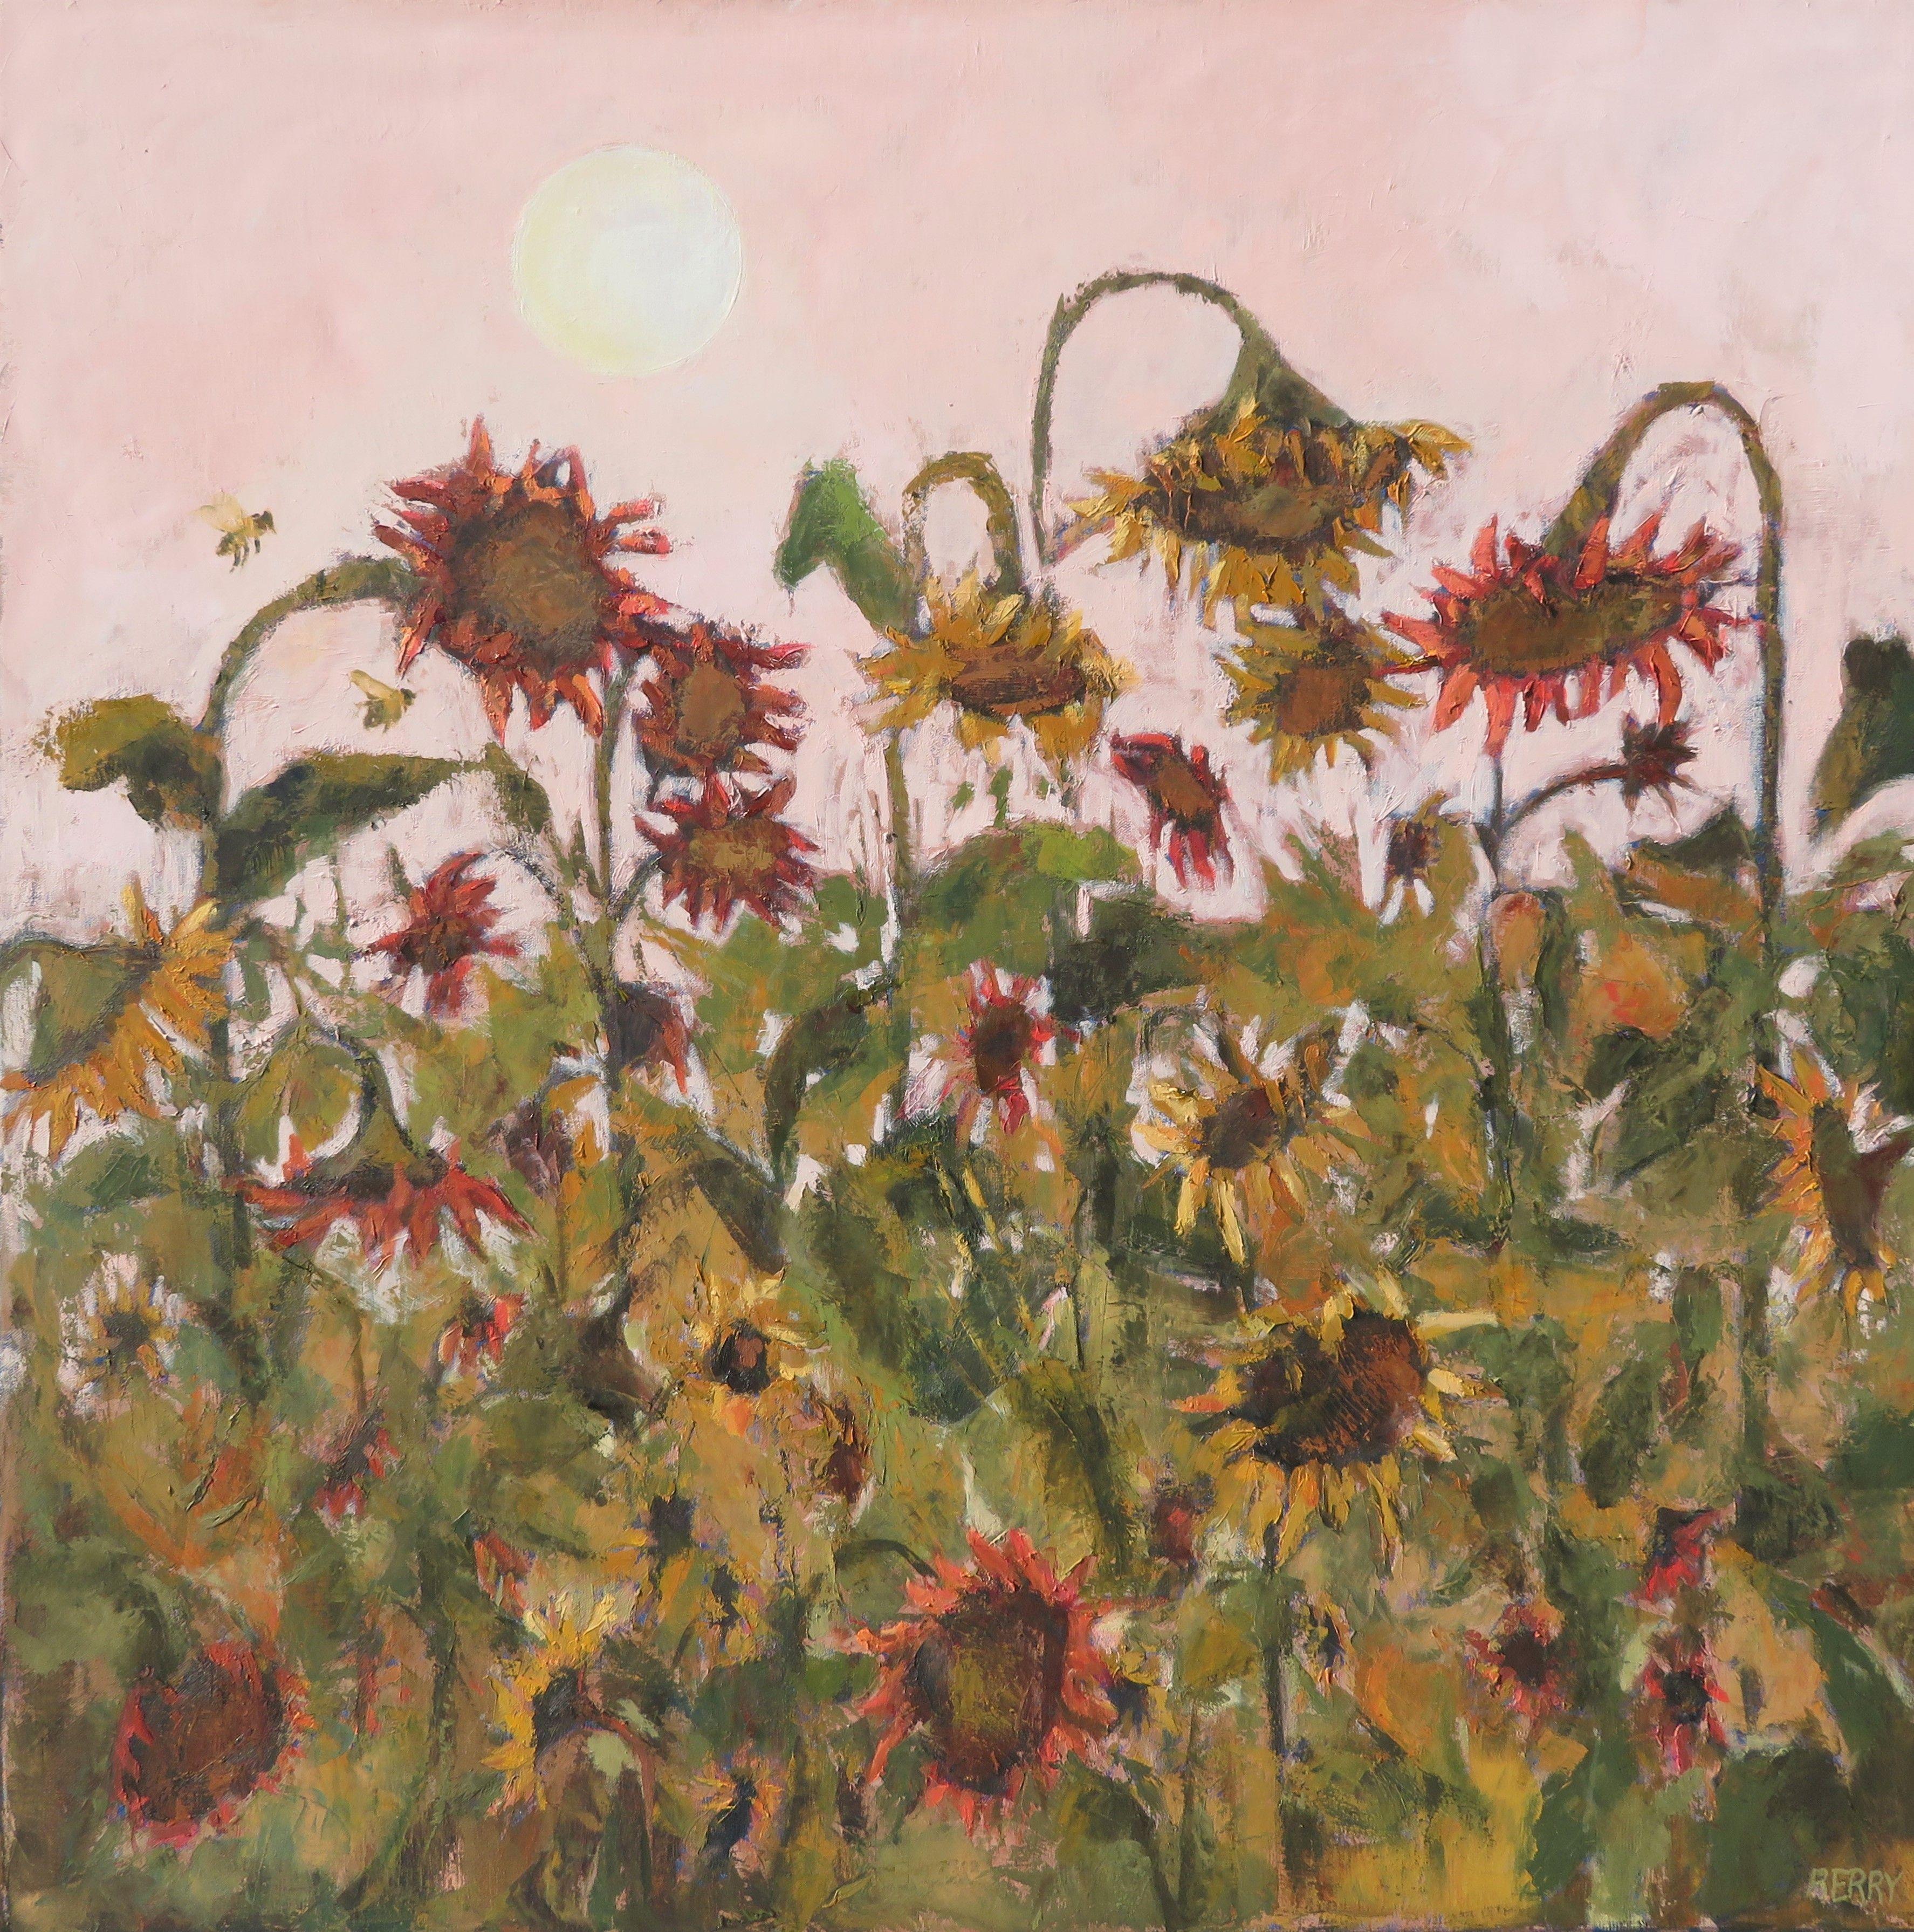 Sunflowers like to face the sun although their heads always seem to be nodding.  They offer food to the bees, squirrels, birds and deer.  Being tall doesn't protect them from being consumed.  This was done with quality oil paints on linen and is